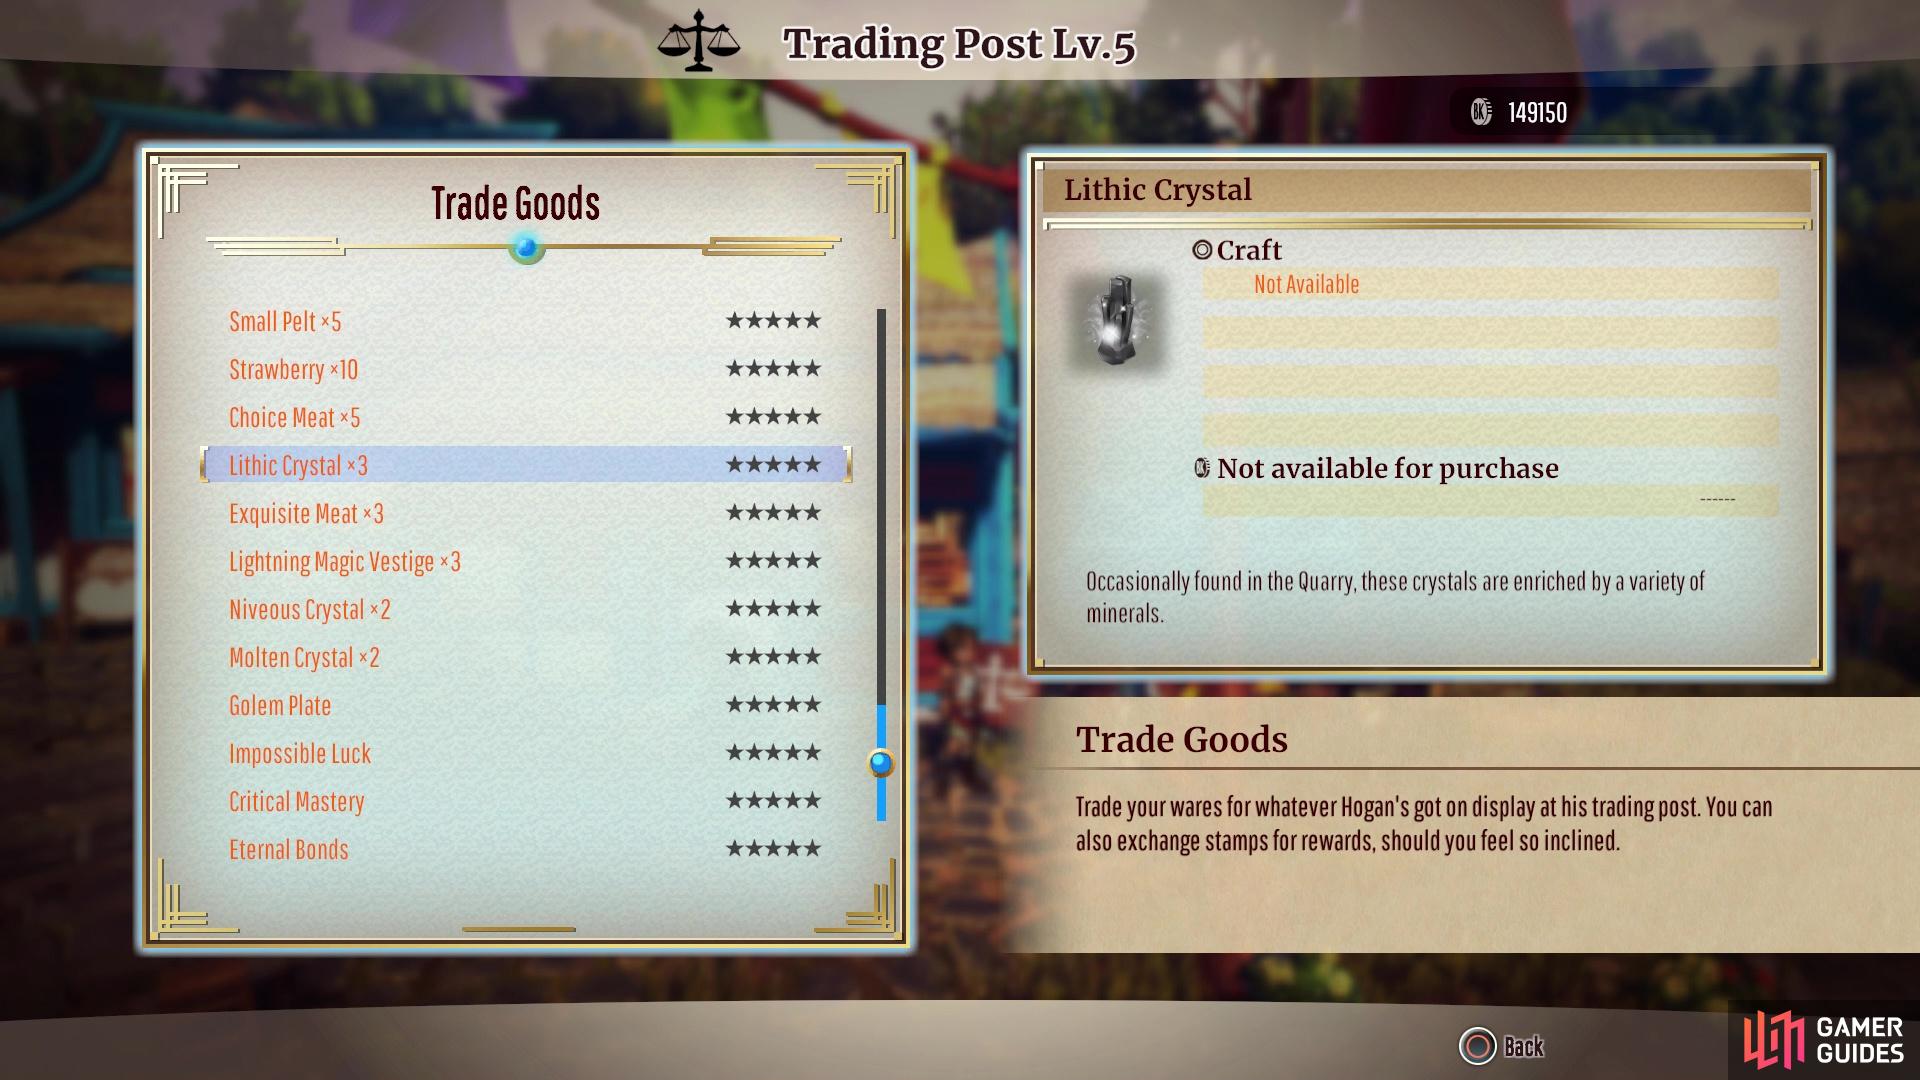 You can get a few from the Trading Spot as a reward when you get enough Stamps